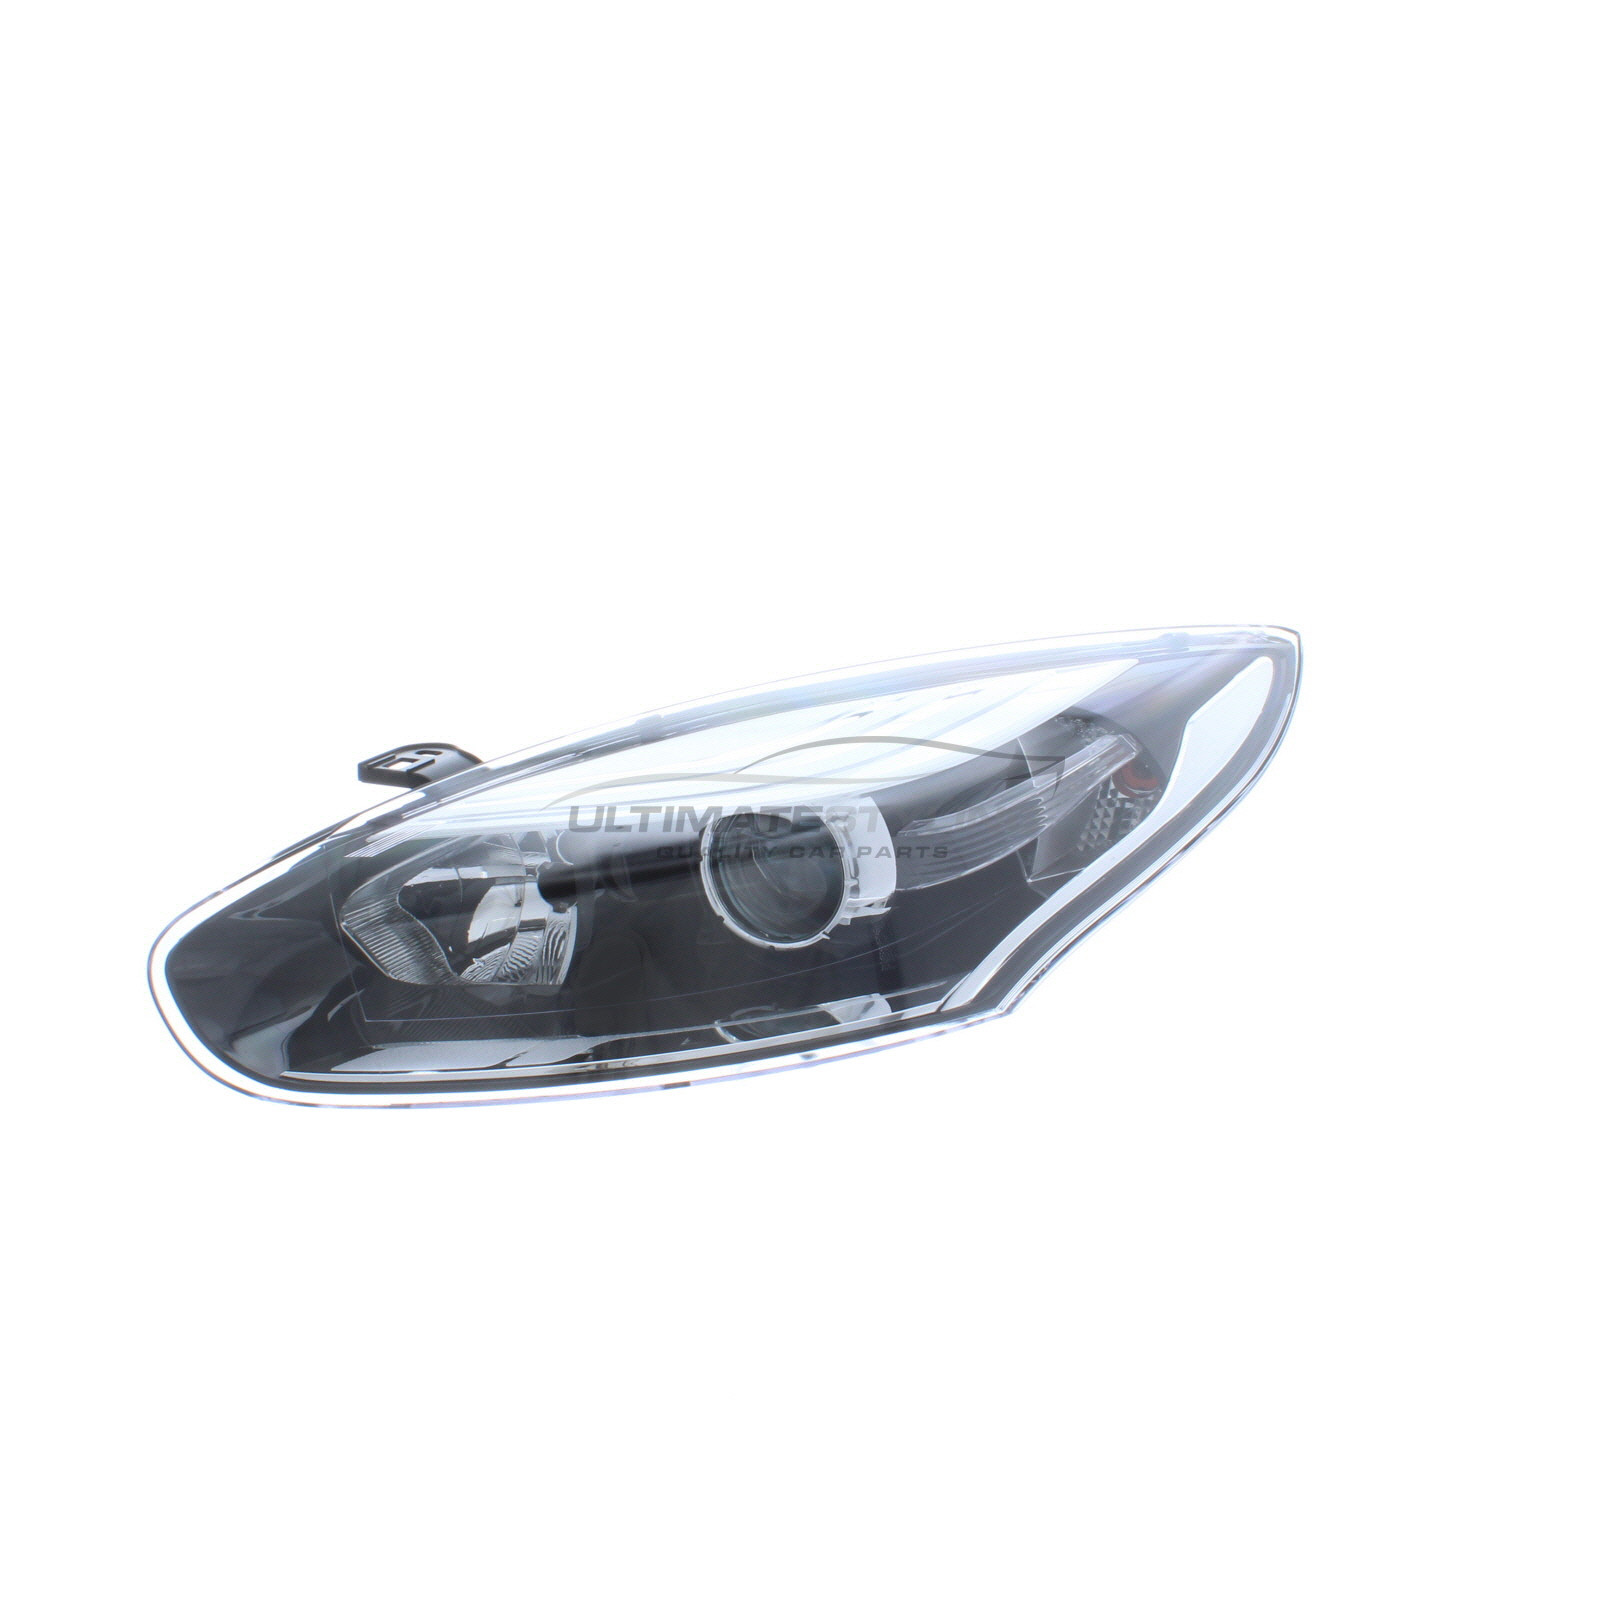 Renault Megane 2014-2016 Halogen, Electric With Motor, Black Headlight / Headlamp with Chrome Surround Passengers Side (LH)